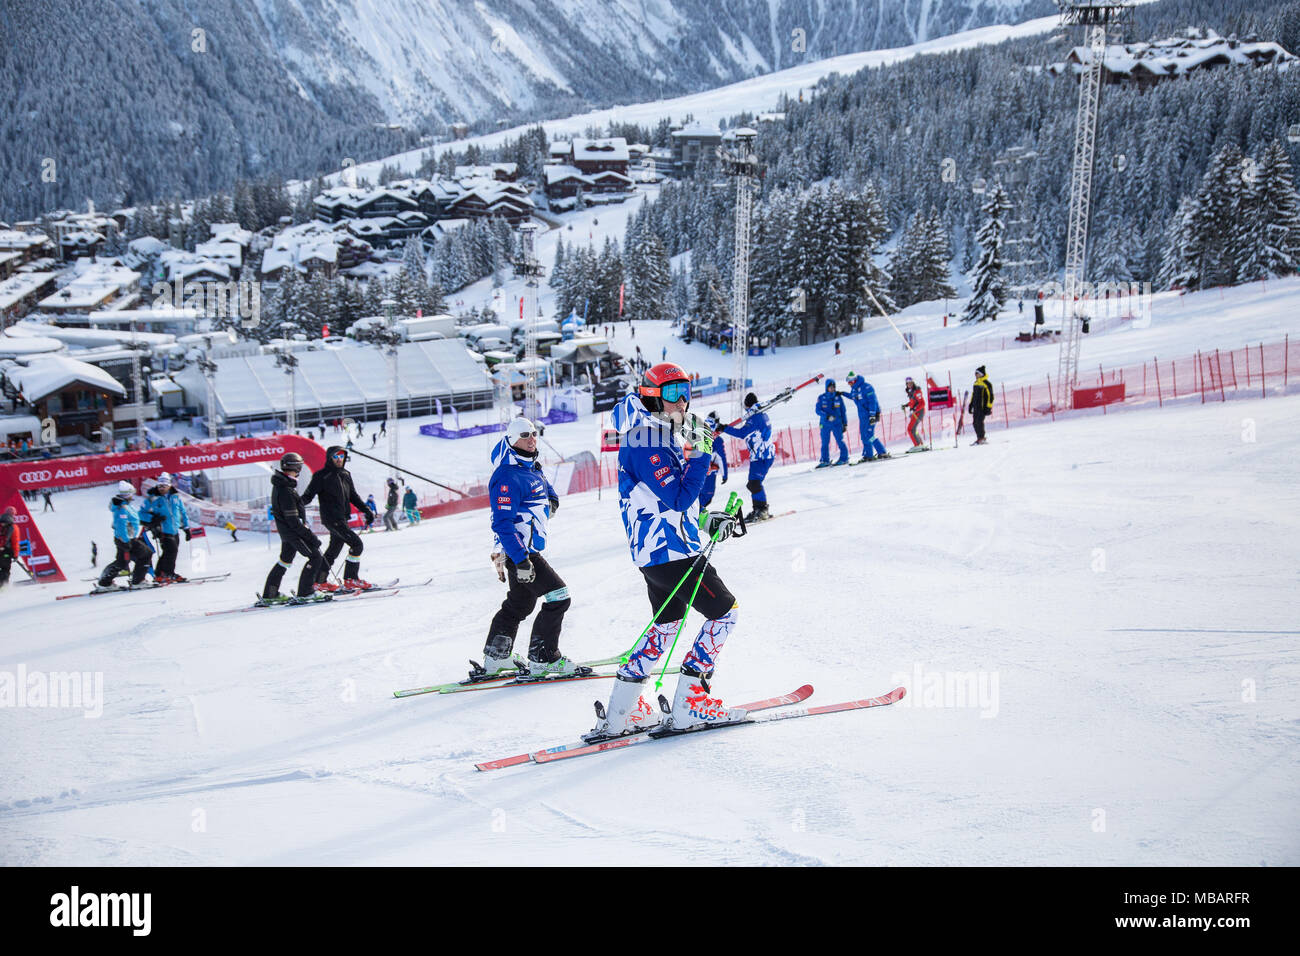 Petra Vlhova of Slovakia inspecting the course in Courchevel 1850 prior to competiting the Giant Slalom Audi Fia Alpine Ski World Cup 2017 / 2018 Stock Photo